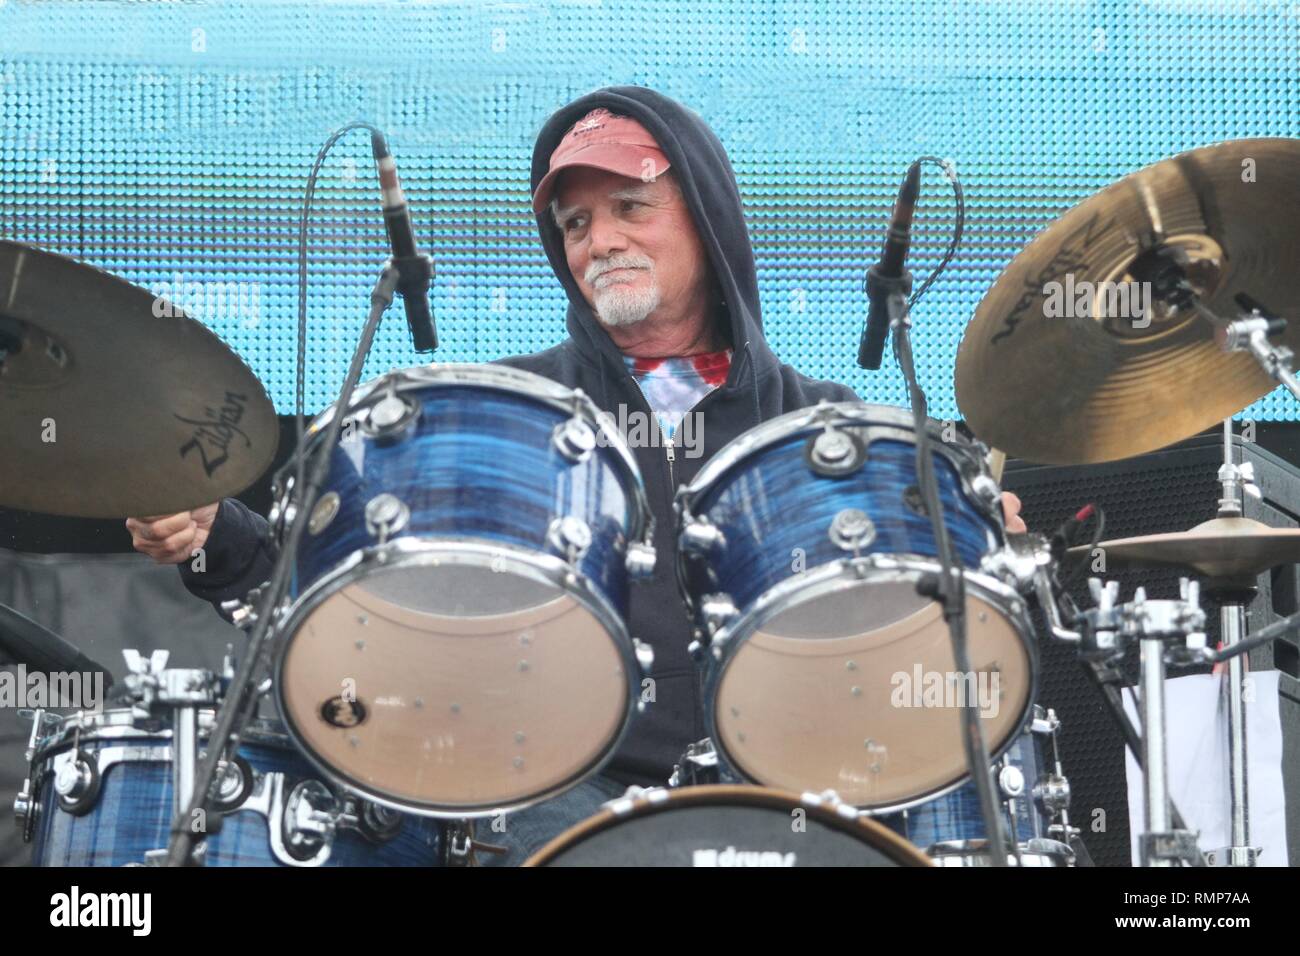 Grateful Dead drummer Bill Kreutzmann is shown performing on stage during a 'live' concert appearance with the 7 Walkers. Stock Photo